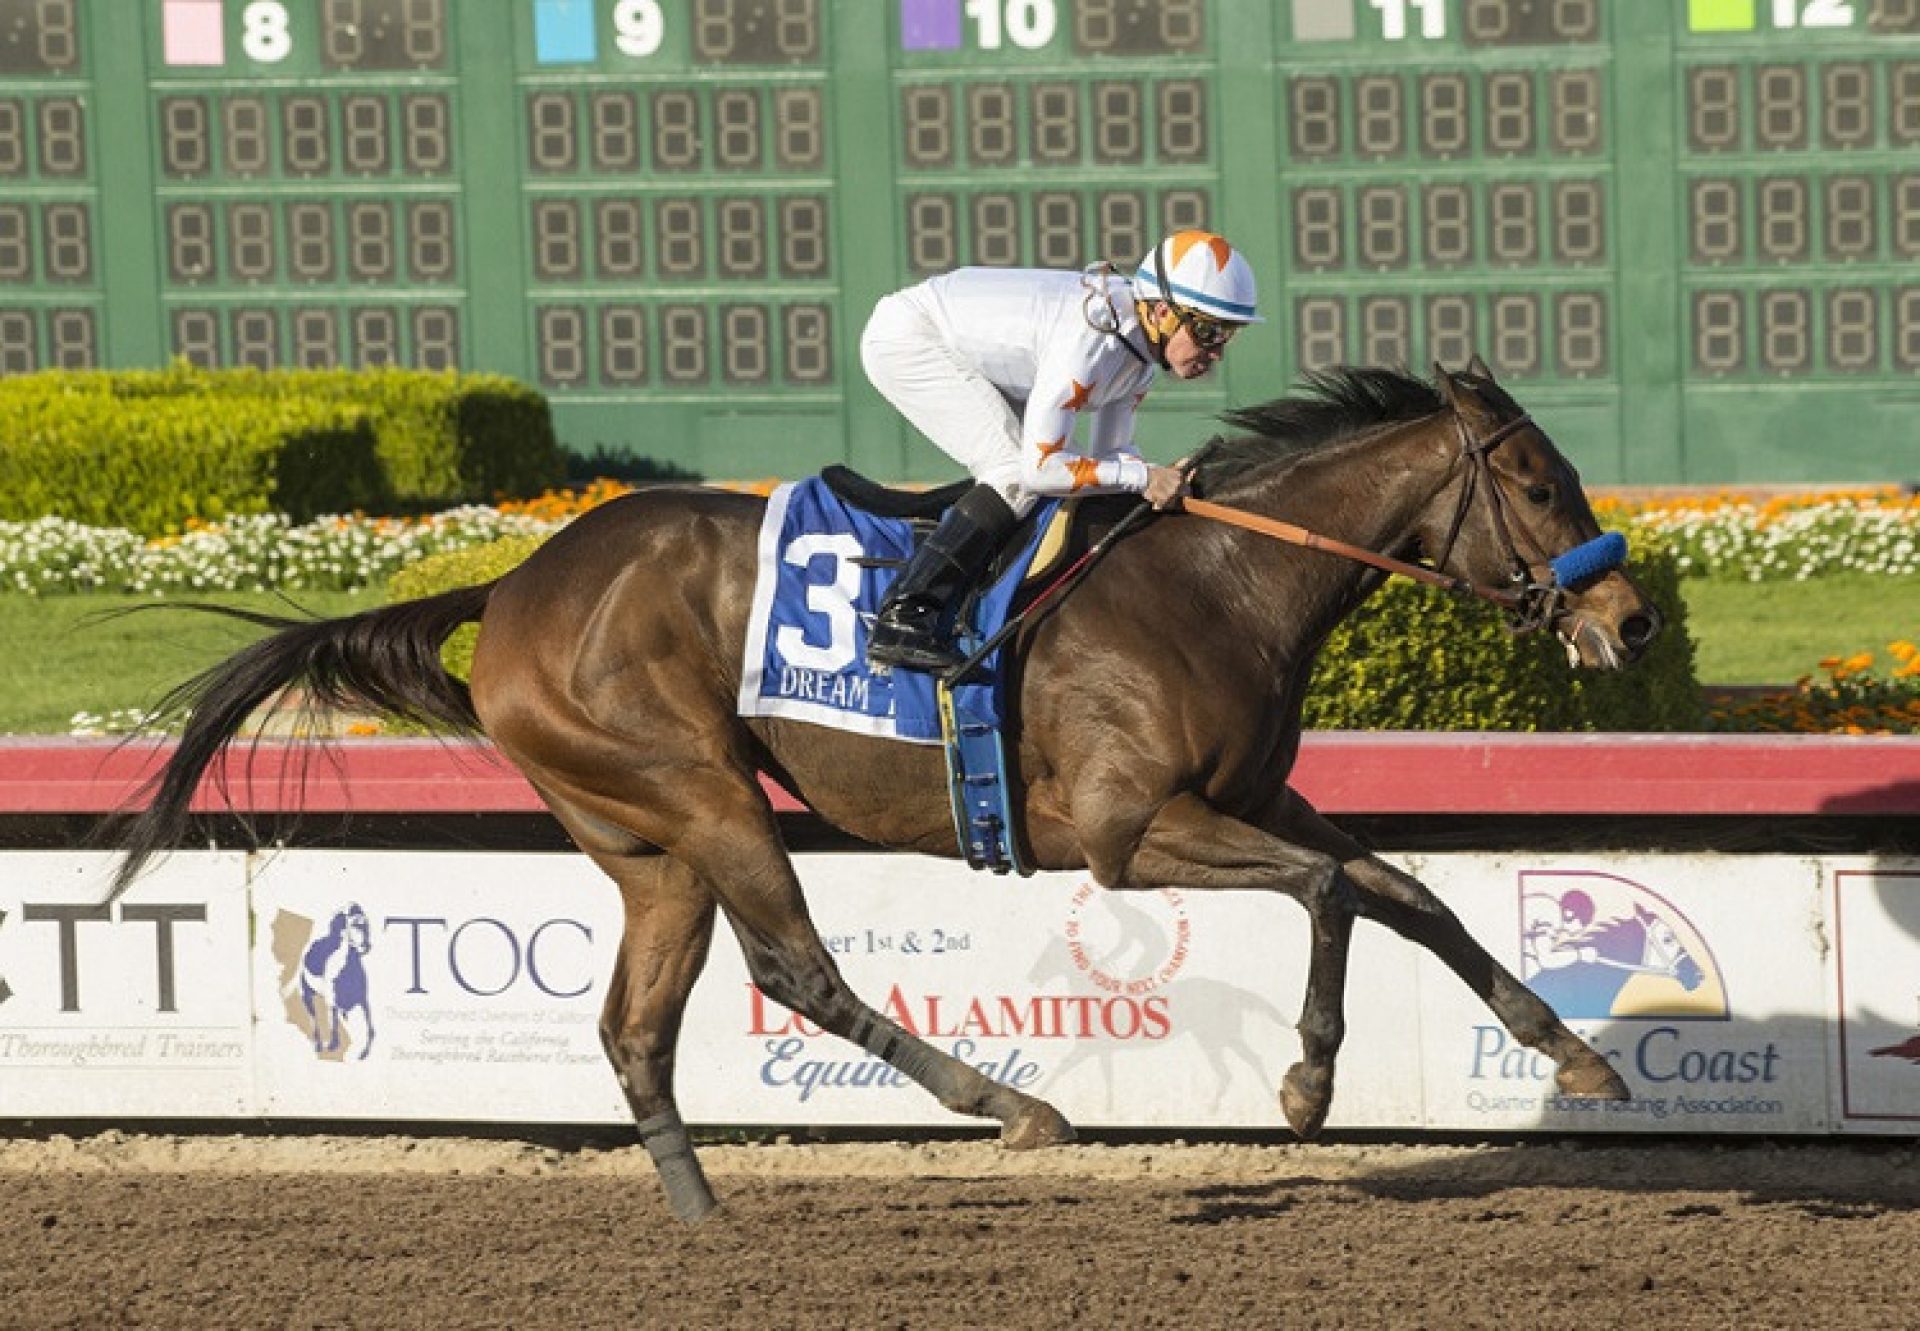 Dream Tree (Uncle Mo) winning the G1 Starlet Stakes at Los Alamitos